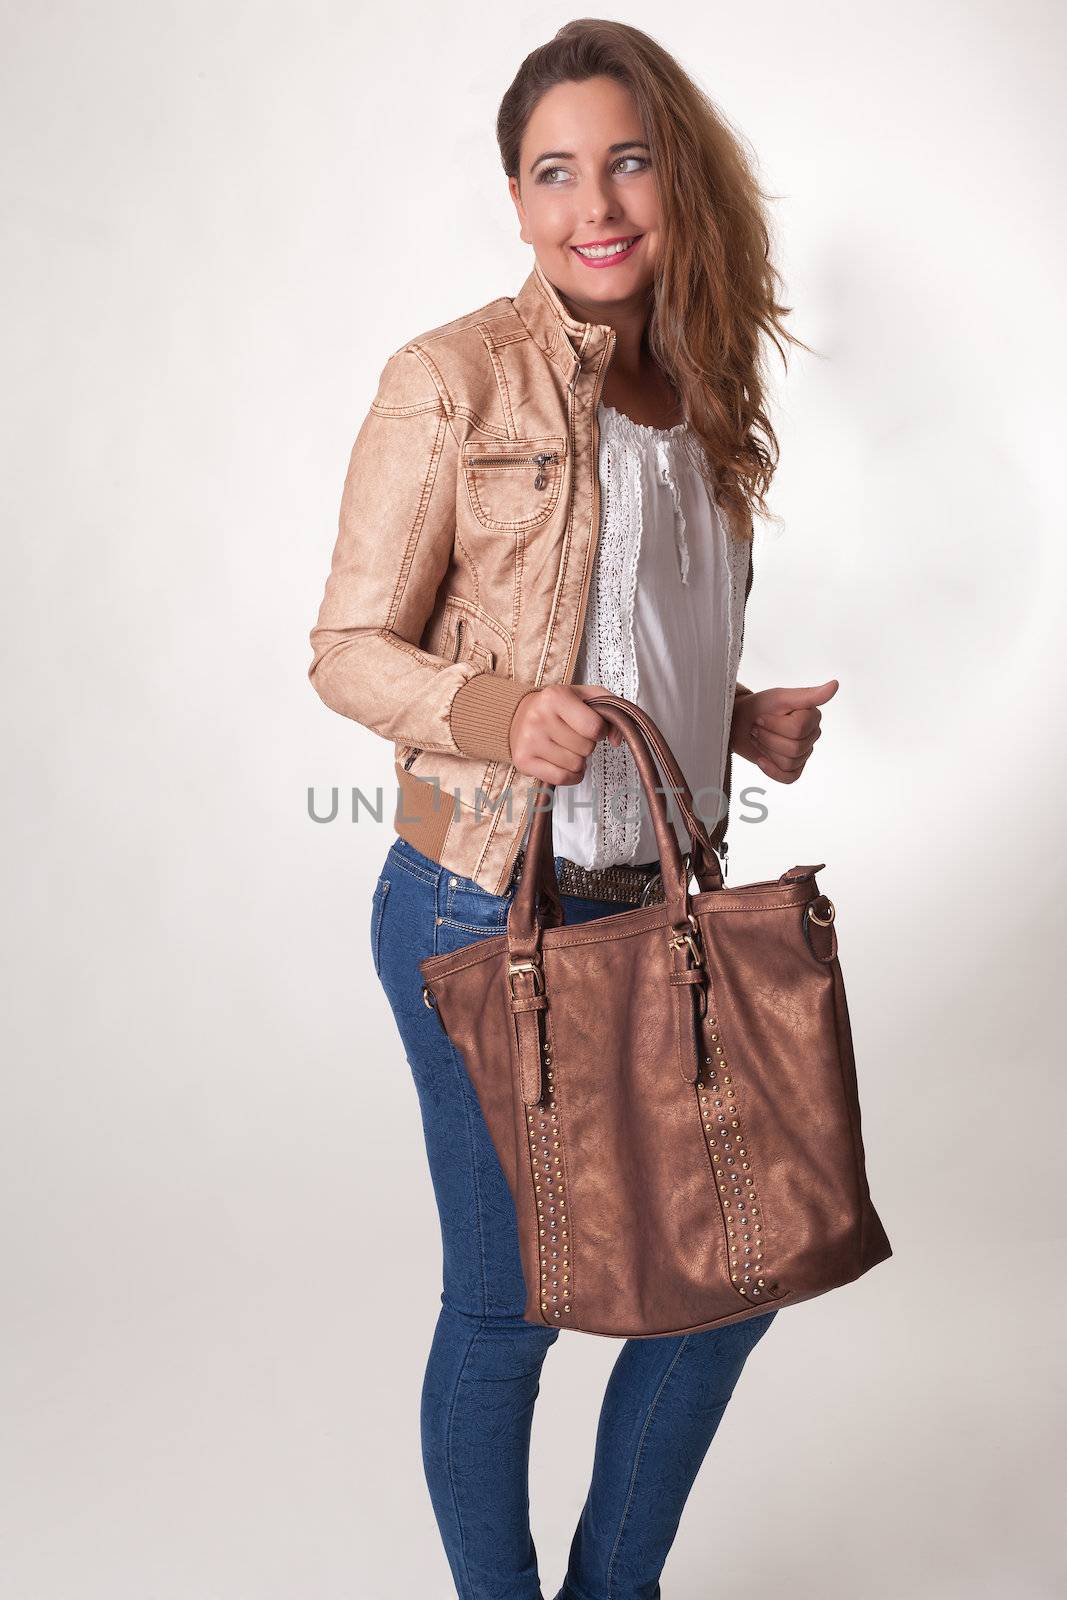 Stylish beautiful young woman with a large brown leather handbag in her hand standing looking back over her shoulder with a friendly smile, studio portrait